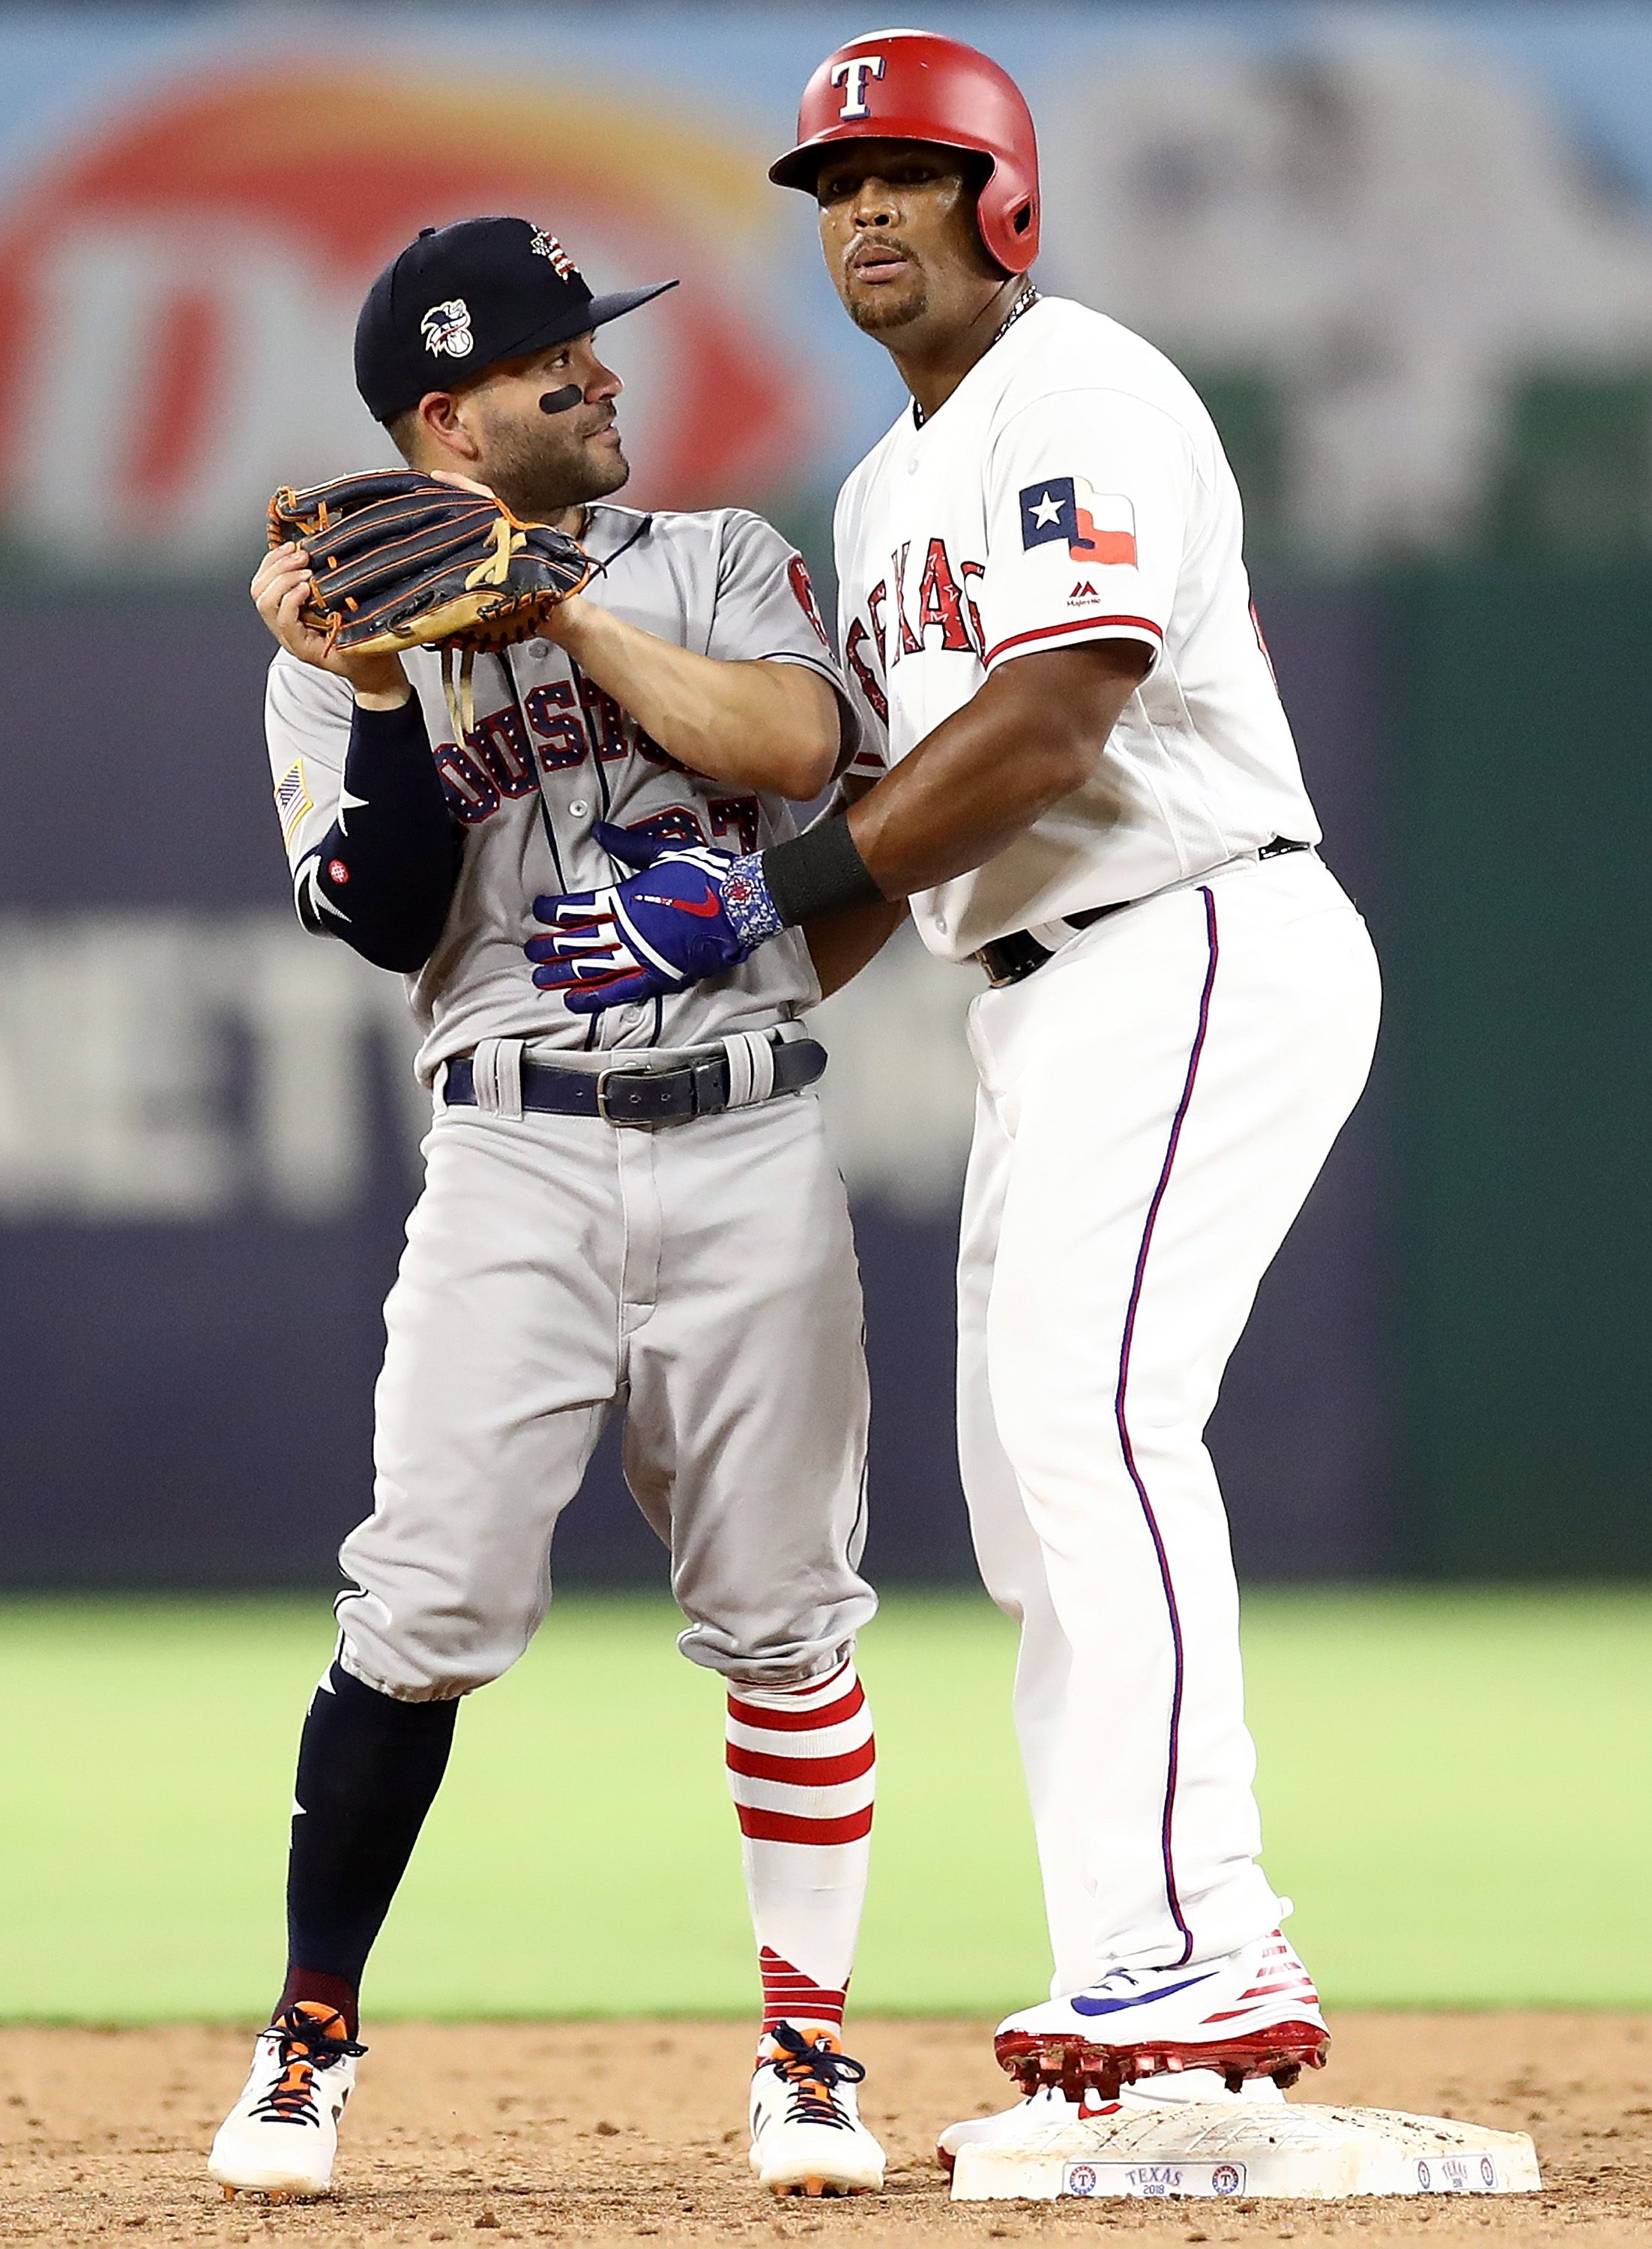 Photos of Jose Altuve looking small no laughing matter as Astros star  continues to dominate postseason